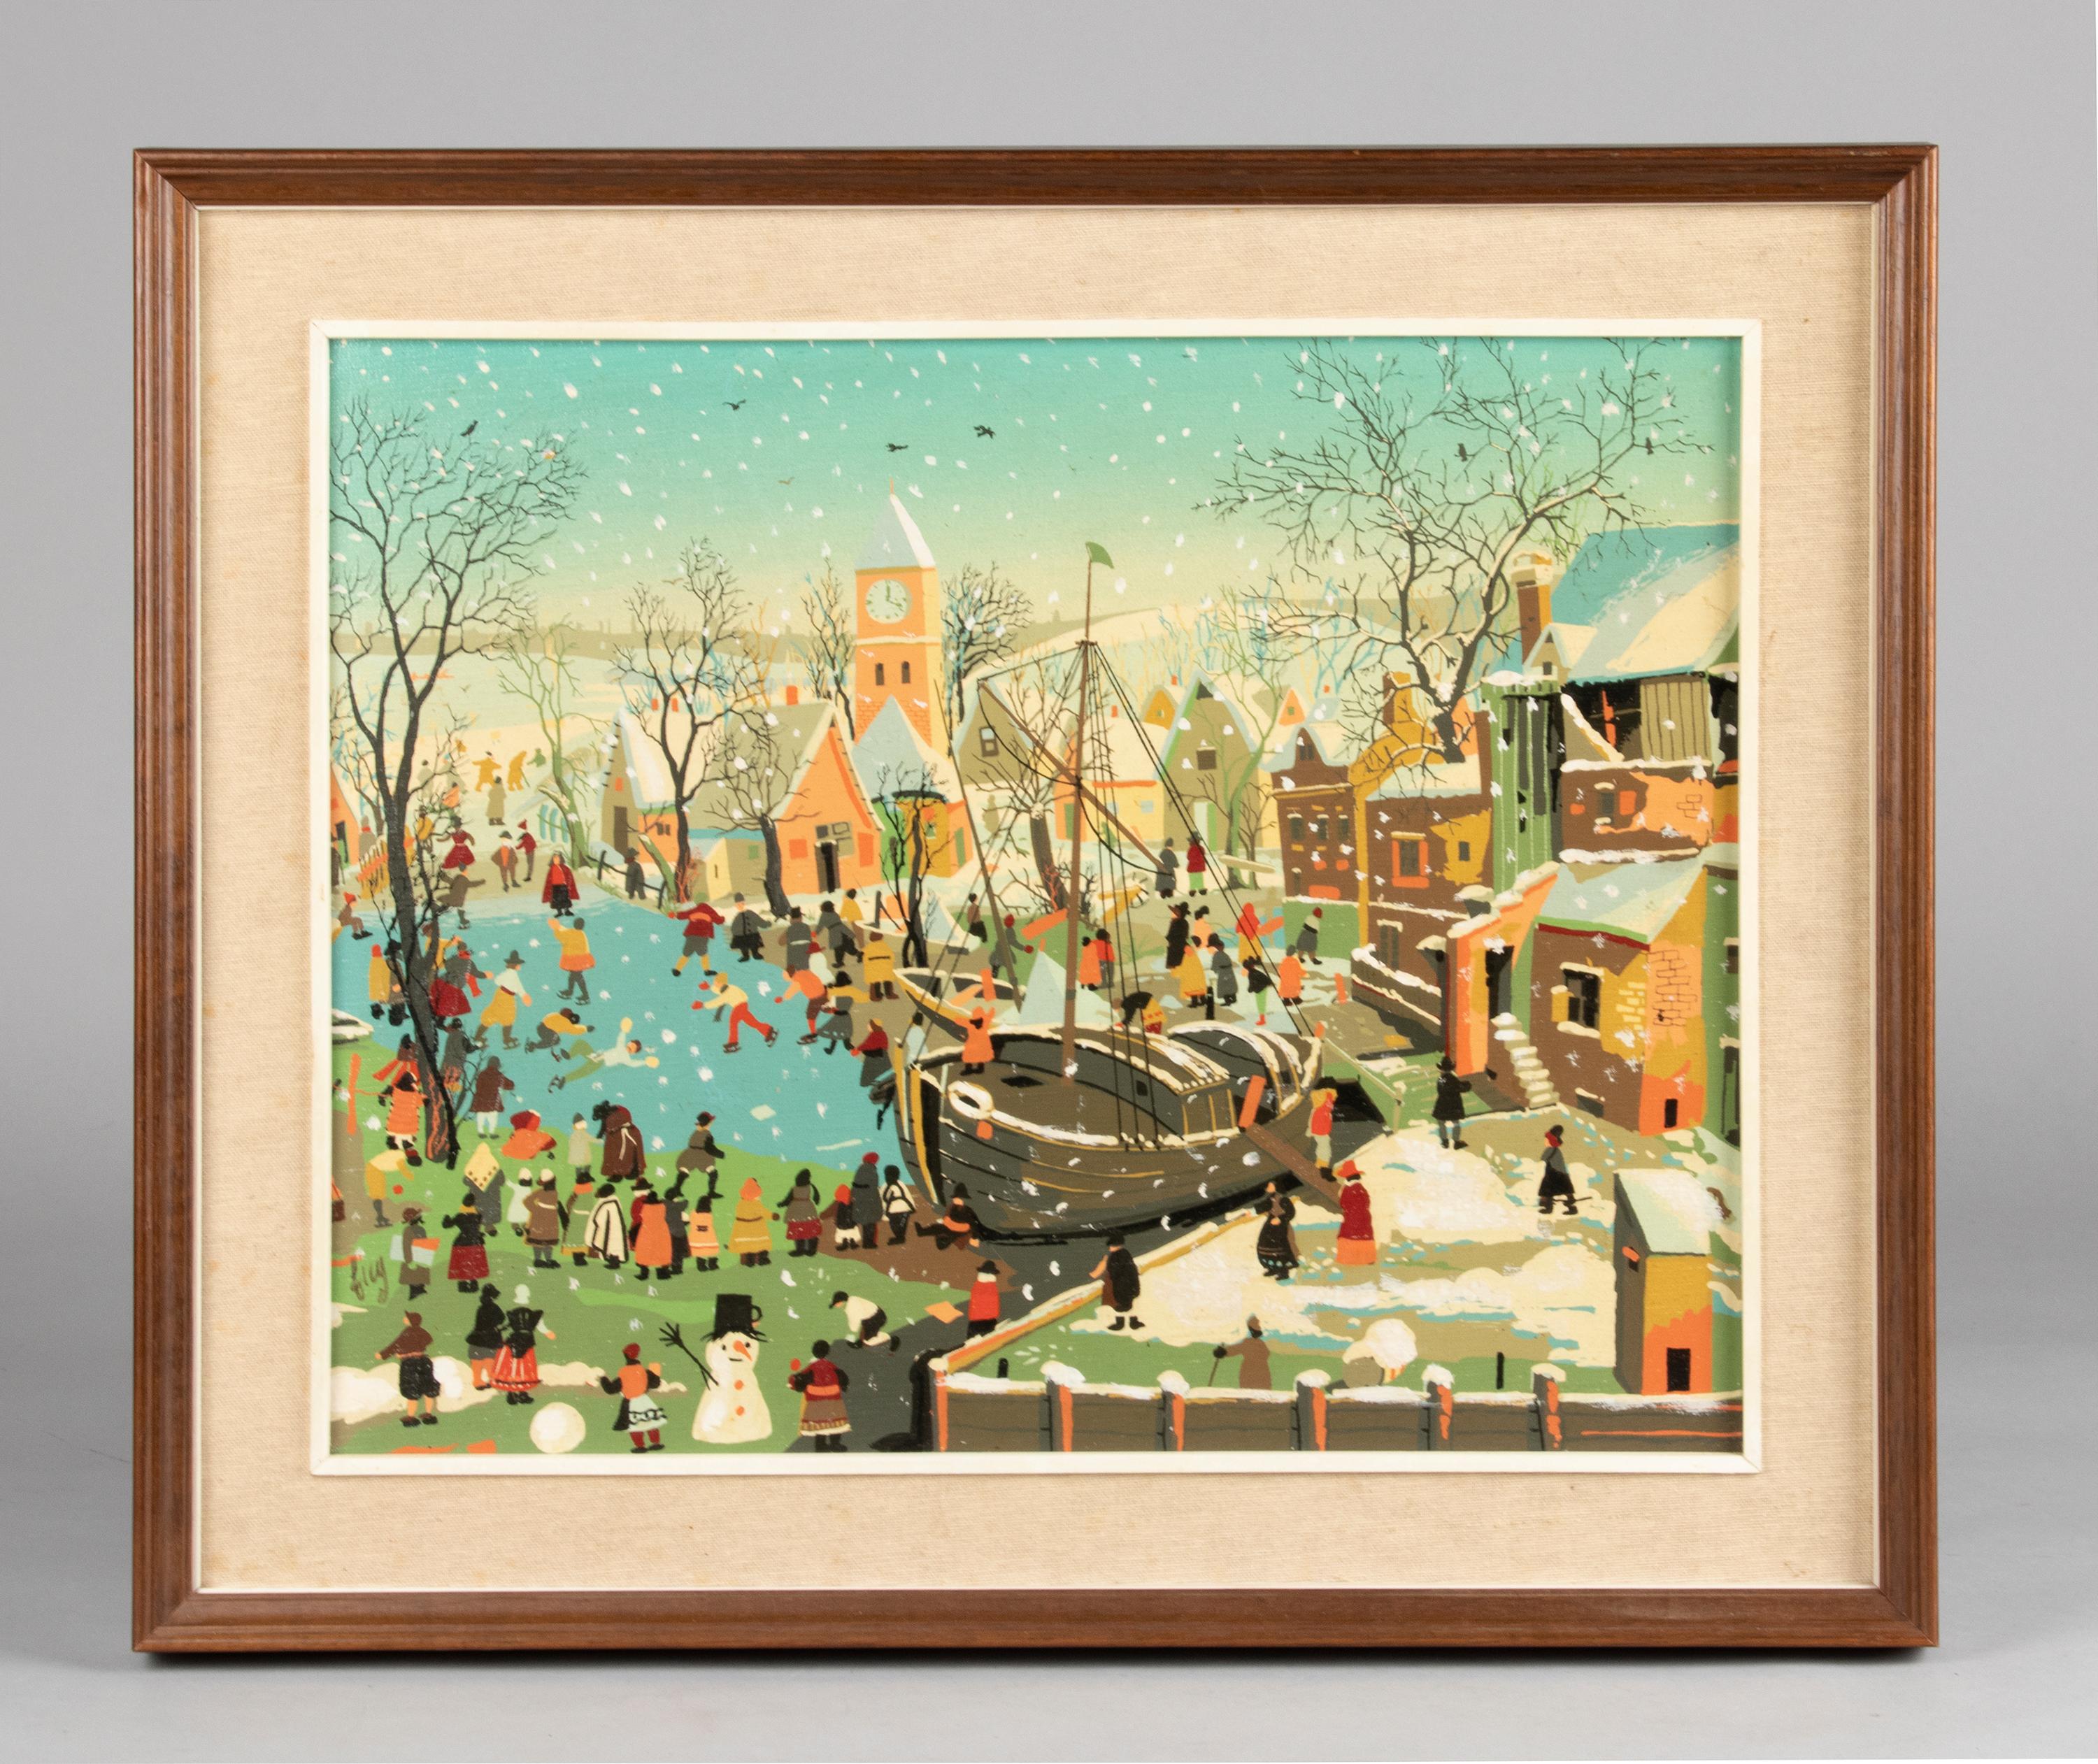 A naive painting of a winter landscape with ice skaters, in the style of the 17th century Renaissance painter Pieter Brueghel. This painting shows ice skaters of all sorts enjoying a day on a frozen river during a harsh winter. It is painted with